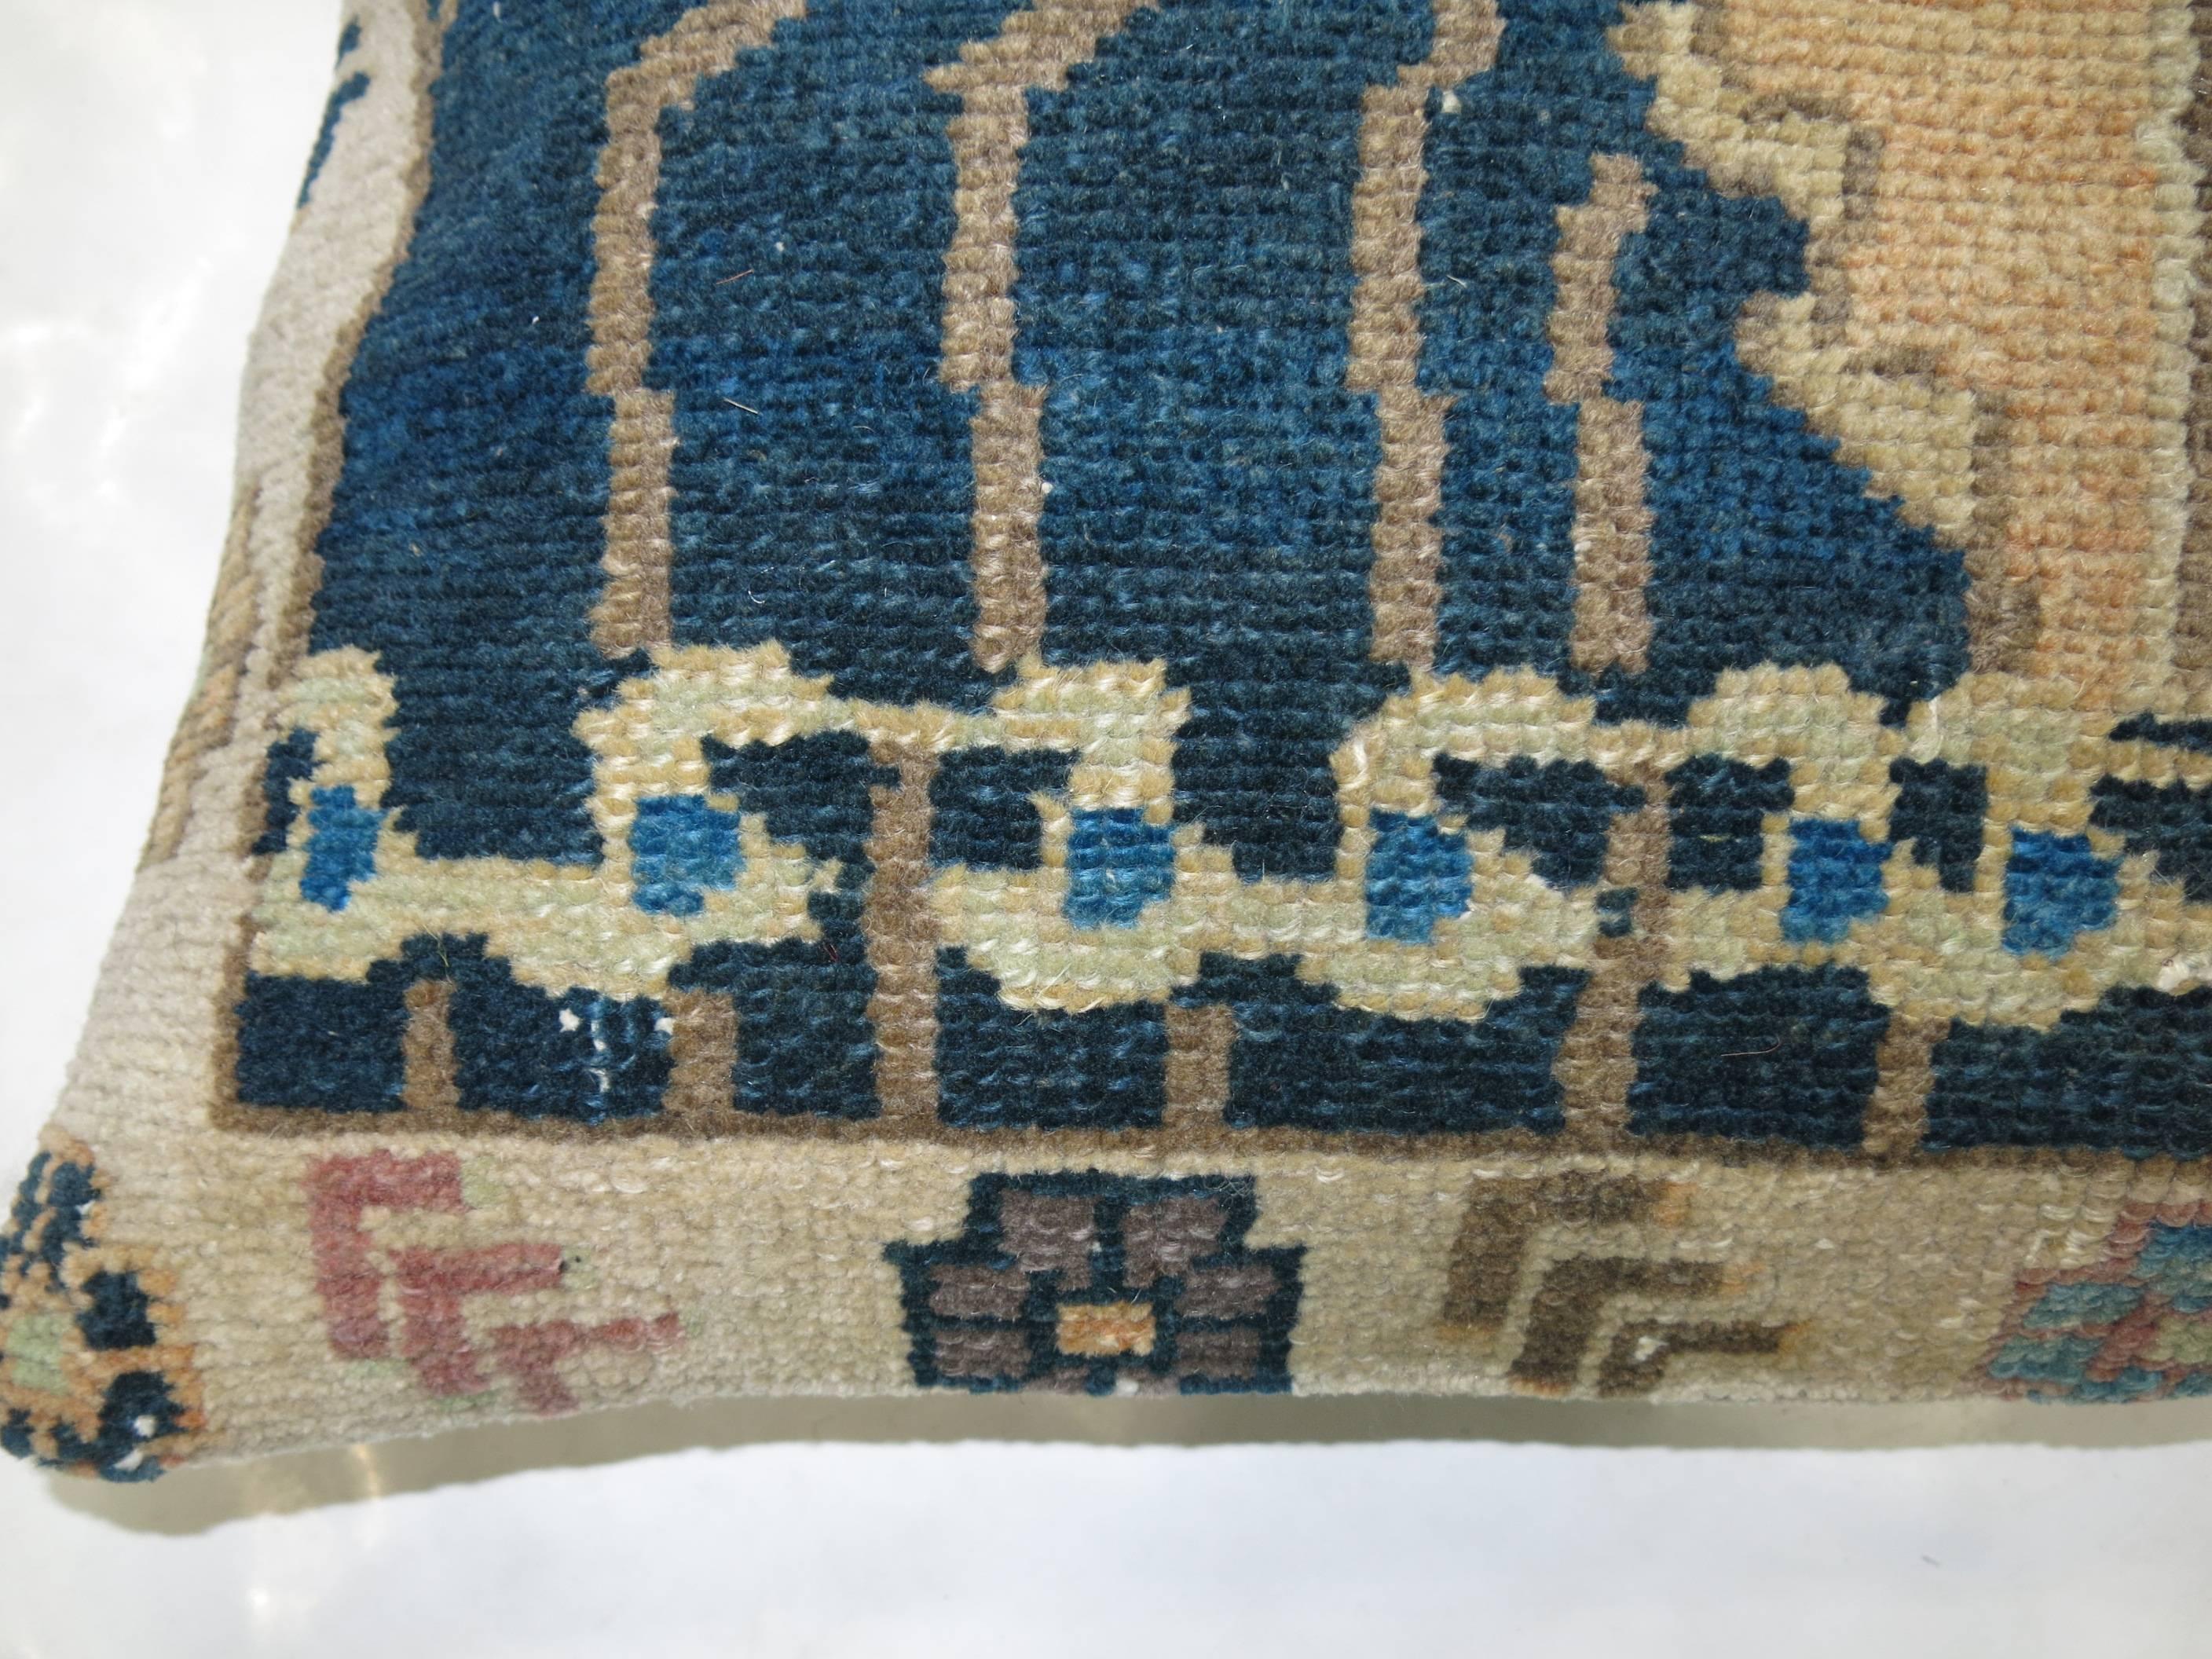 Eclectic best describes this pillow made from a mid-20th century Turkish rug.

21'' x 28''